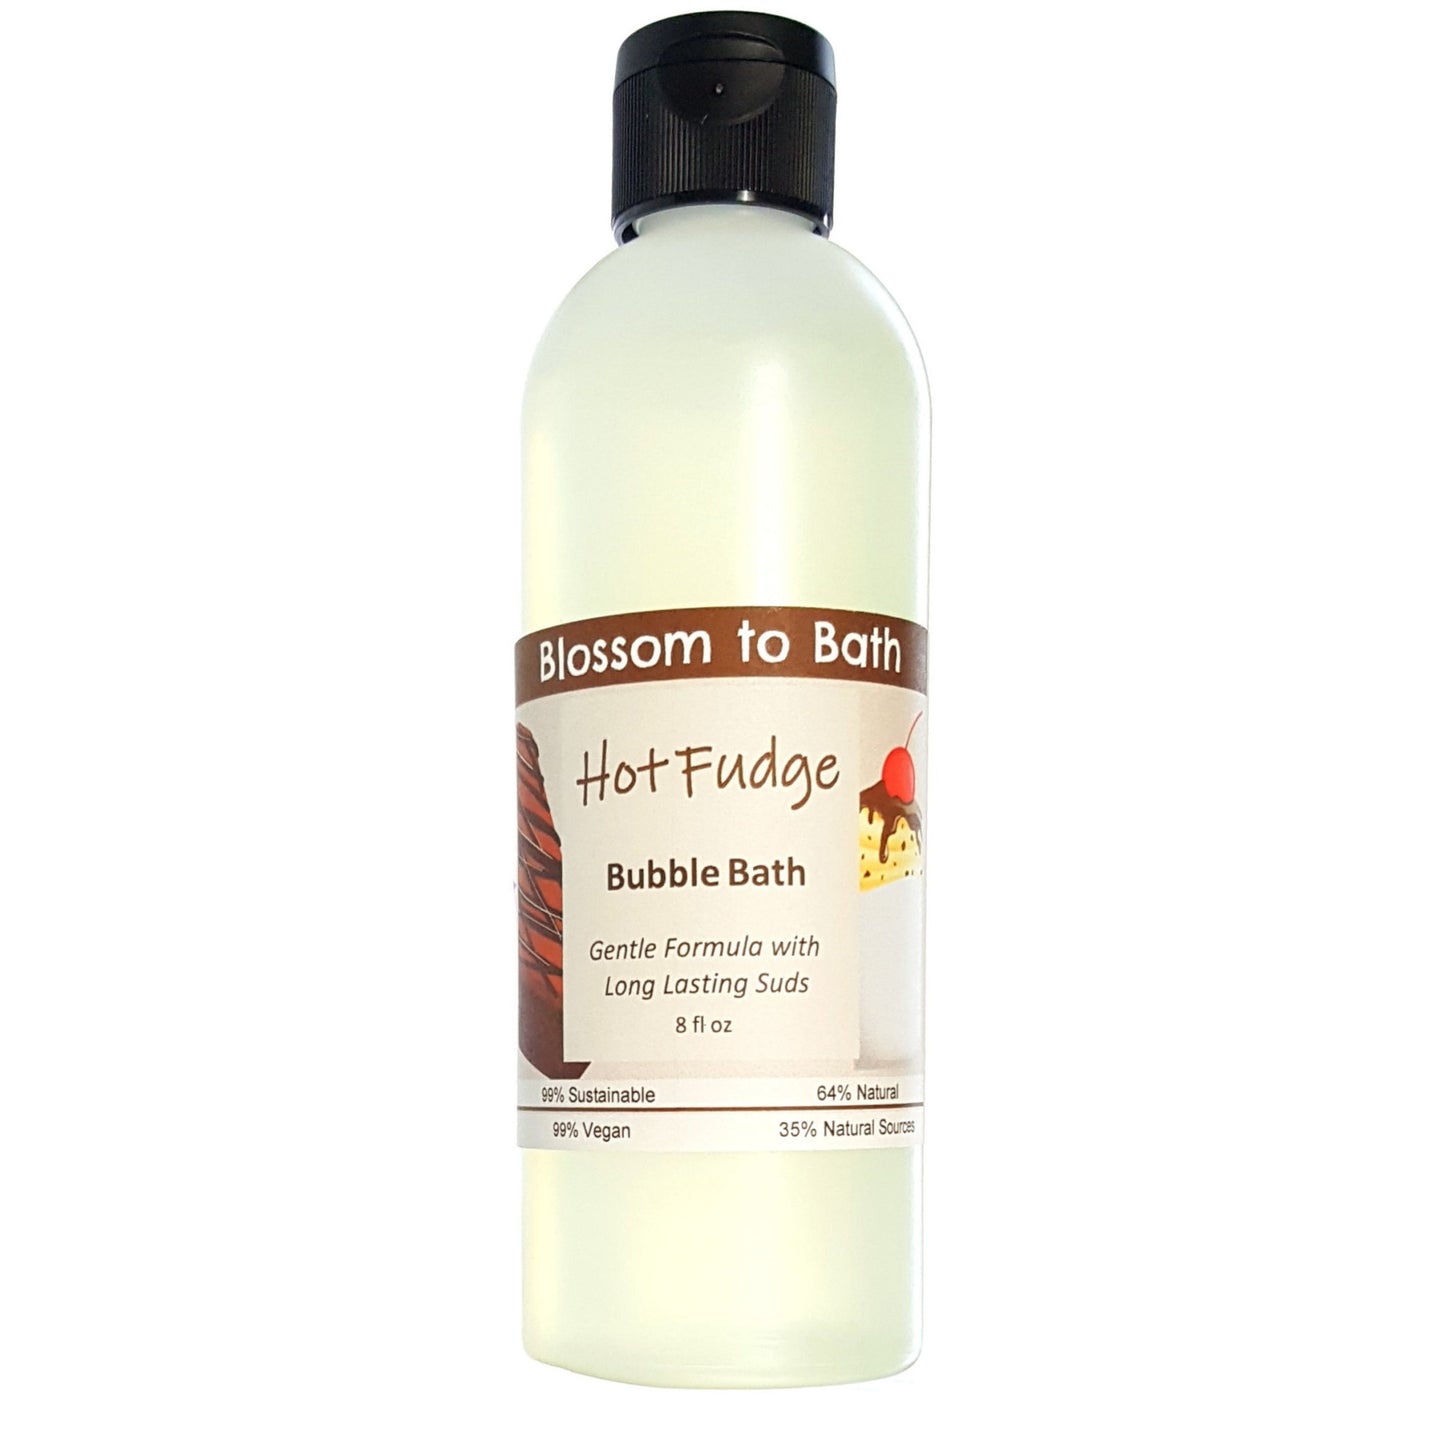 Buy Blossom to Bath Hot Fudge Bubble Bath from Flowersong Soap Studio.  Lively, long lasting  bubbles in a gentle plant based formula for maximum relaxation time  The fragrance is three layers deep in rich chocolate.